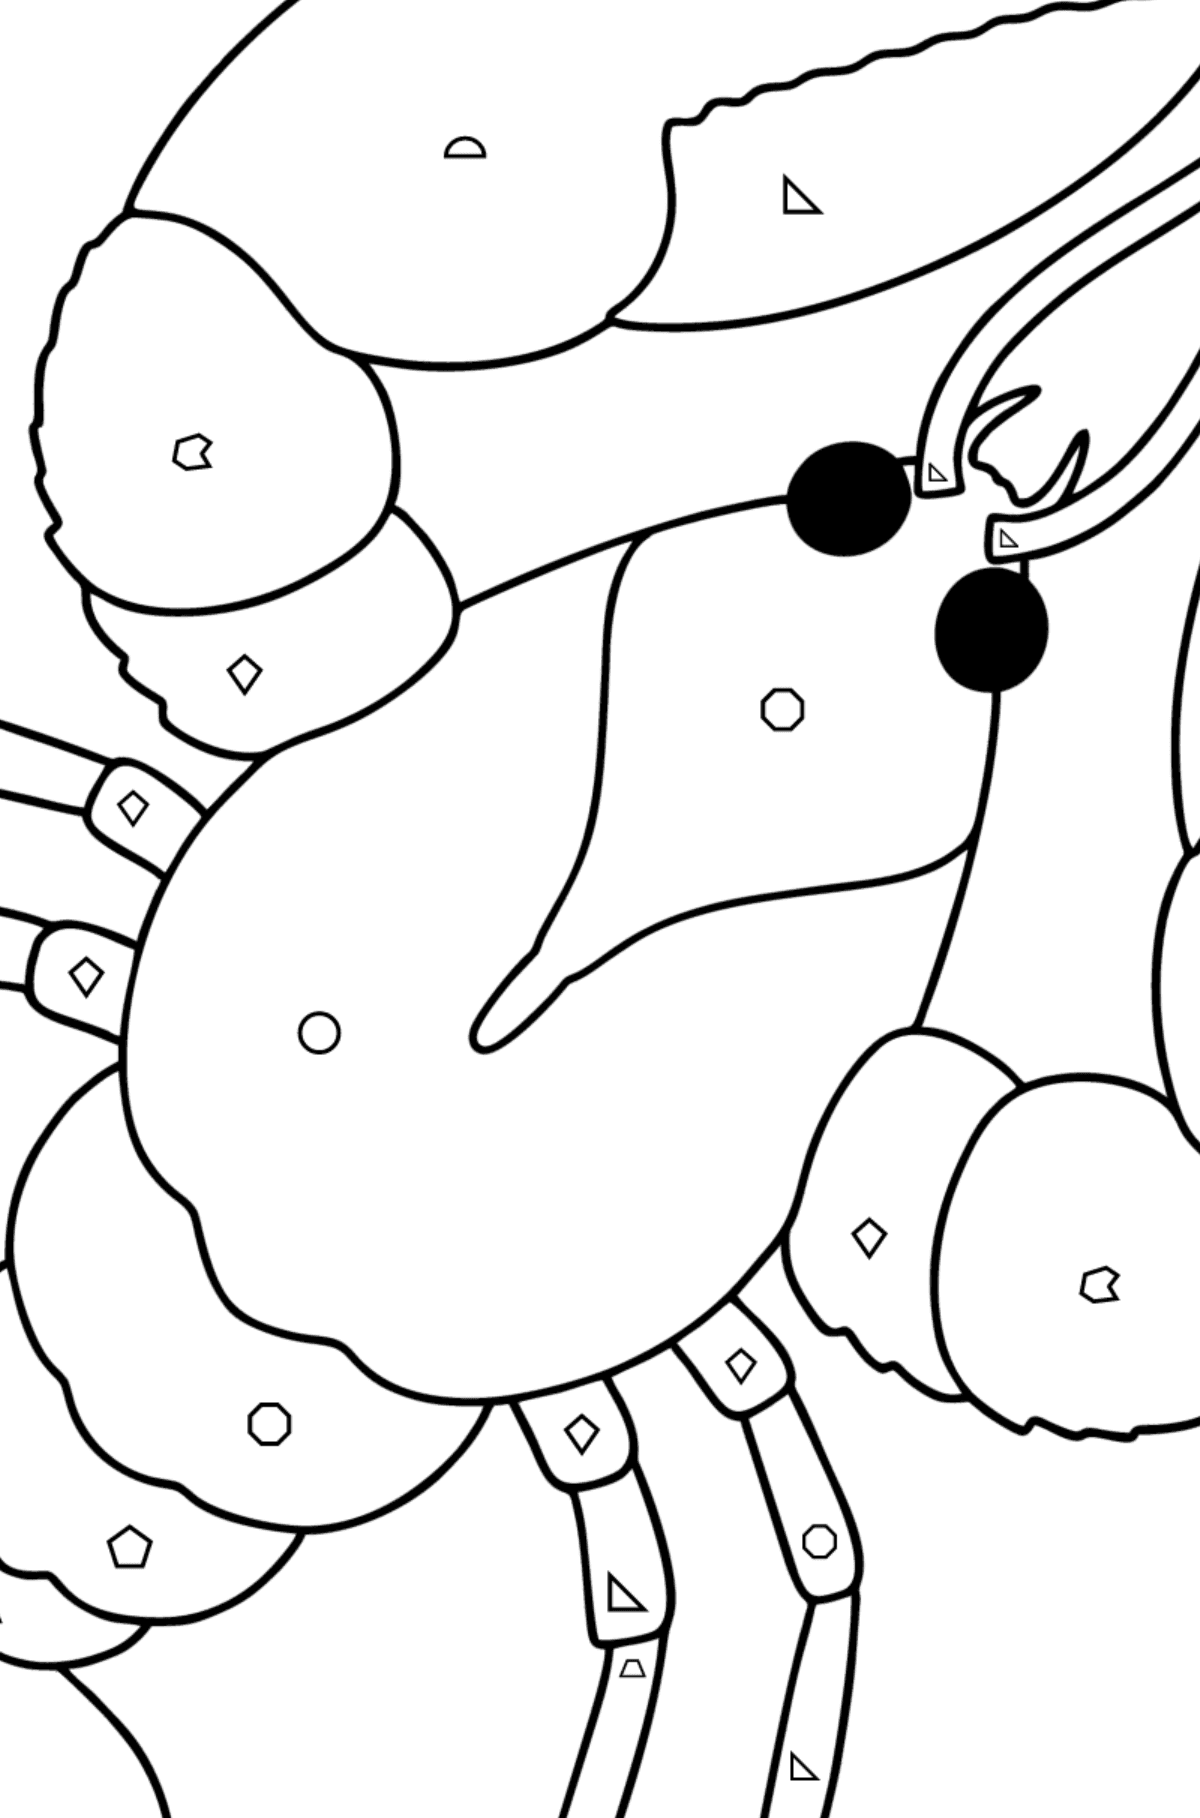 Lobster coloring page - Coloring by Geometric Shapes for Kids